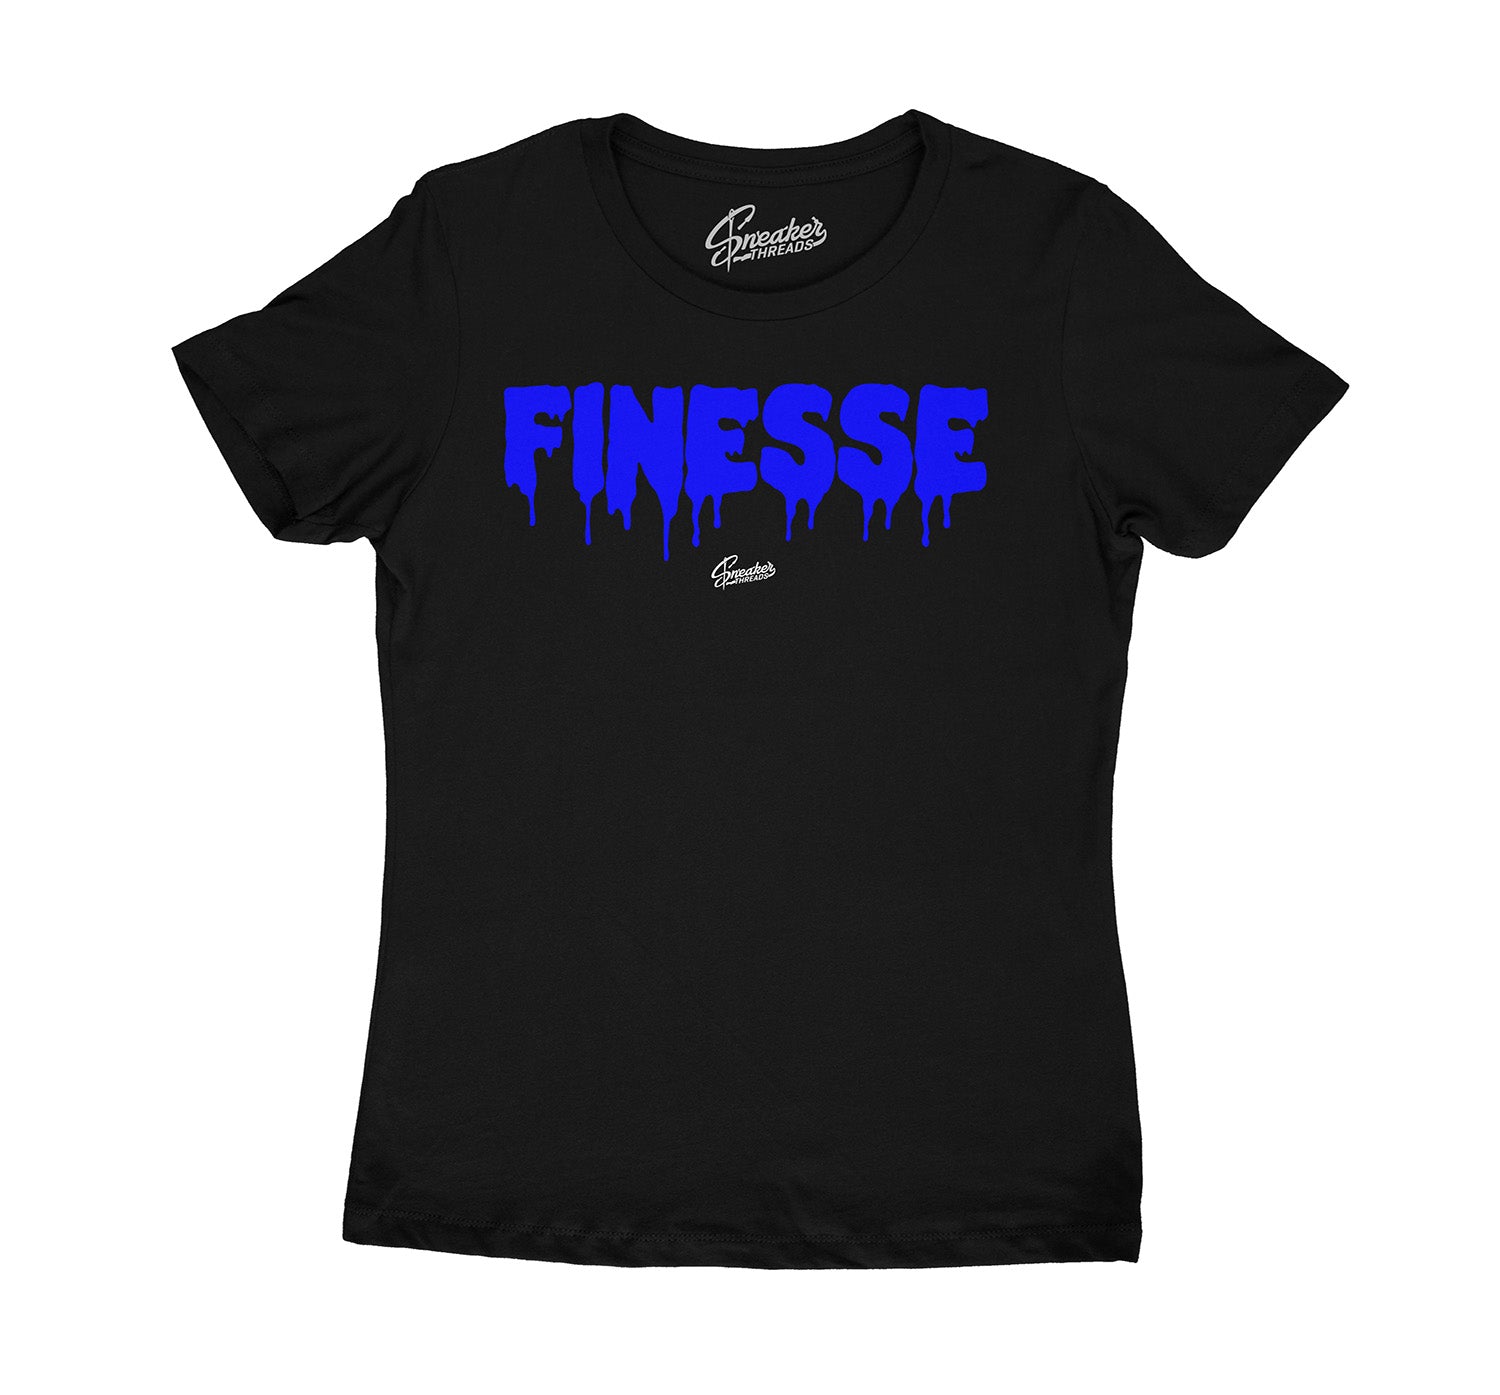 Jordan 12 Game Royals Finesse shirt to match release